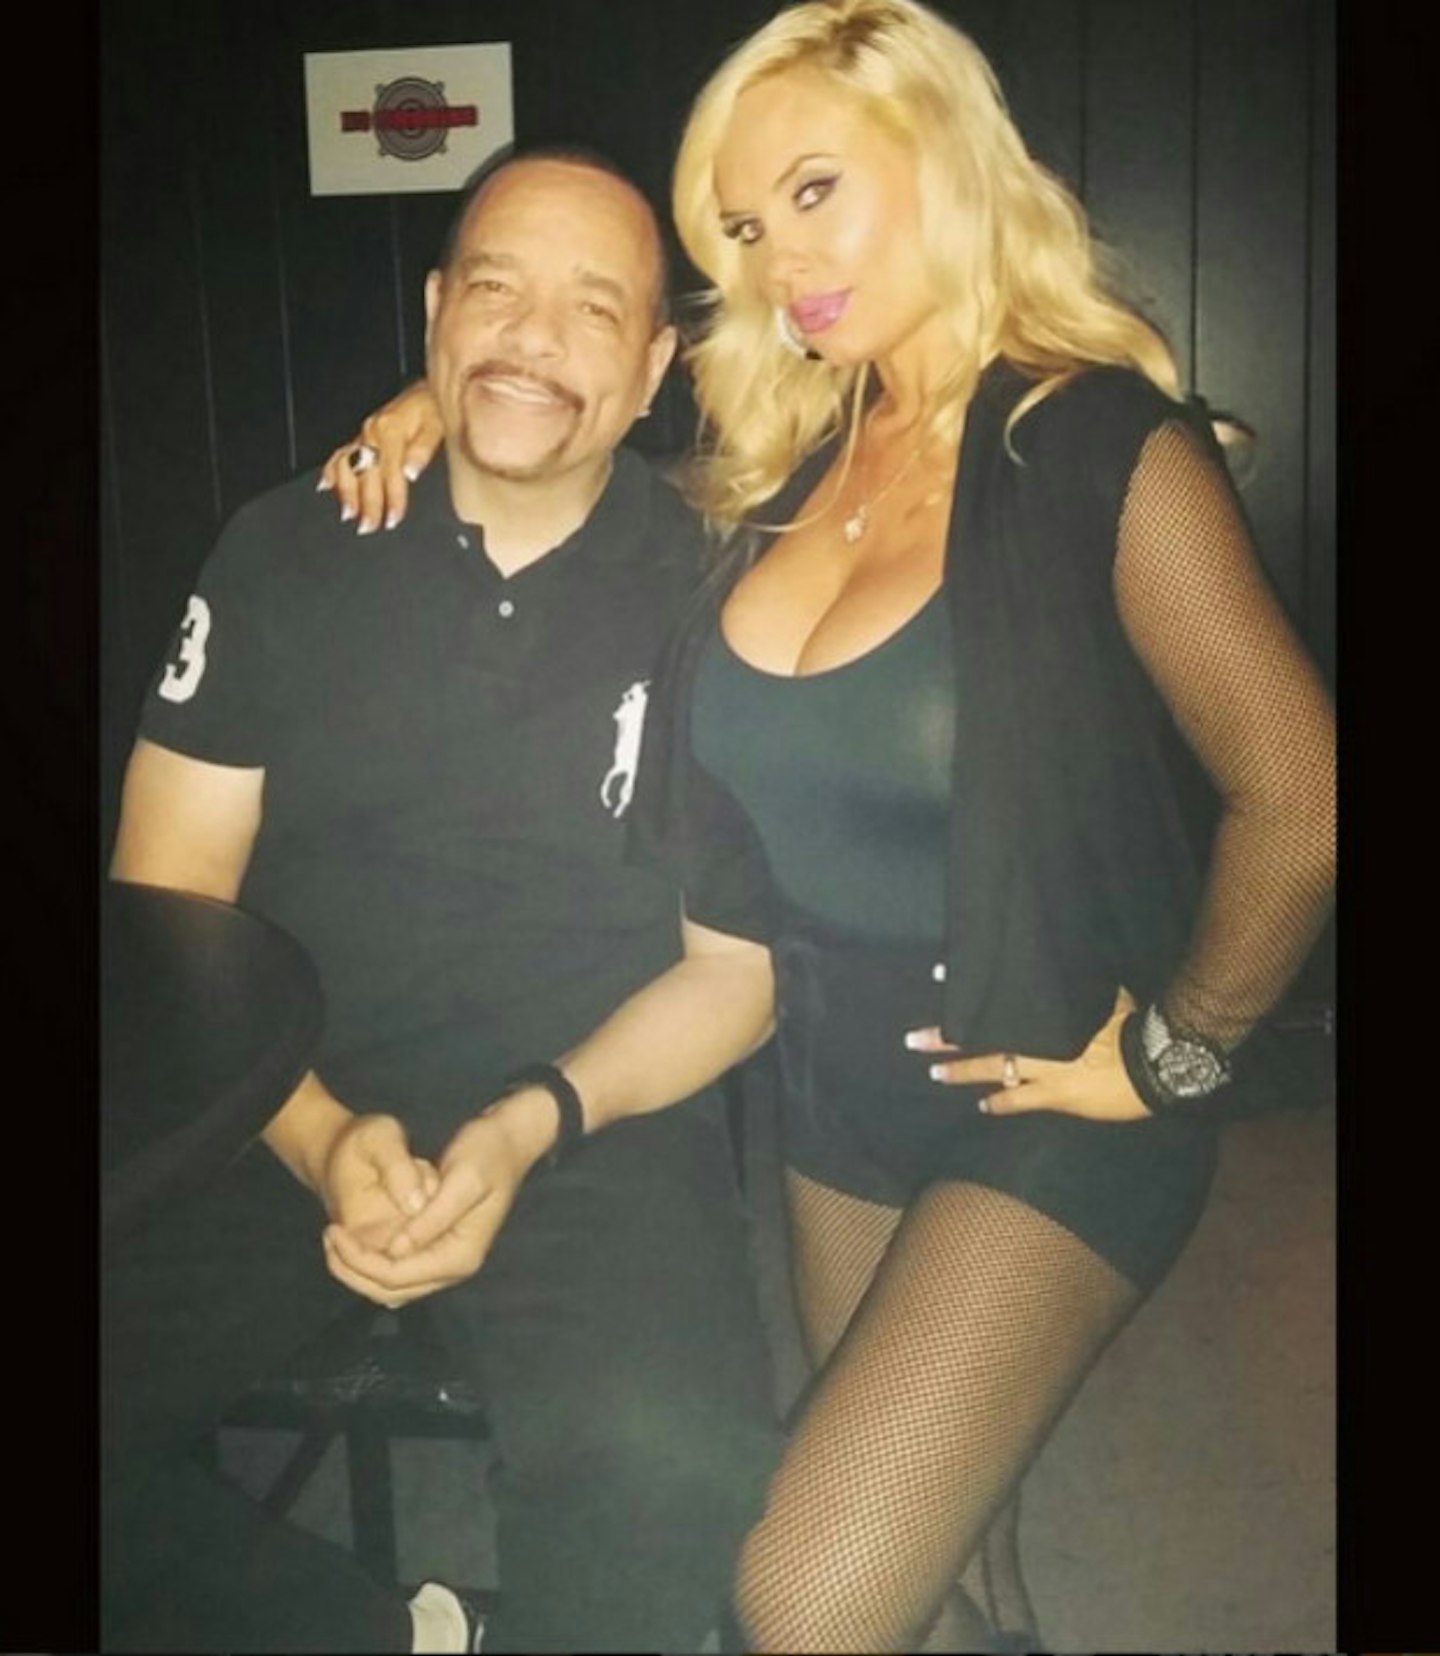 Coco Austin and Ice T